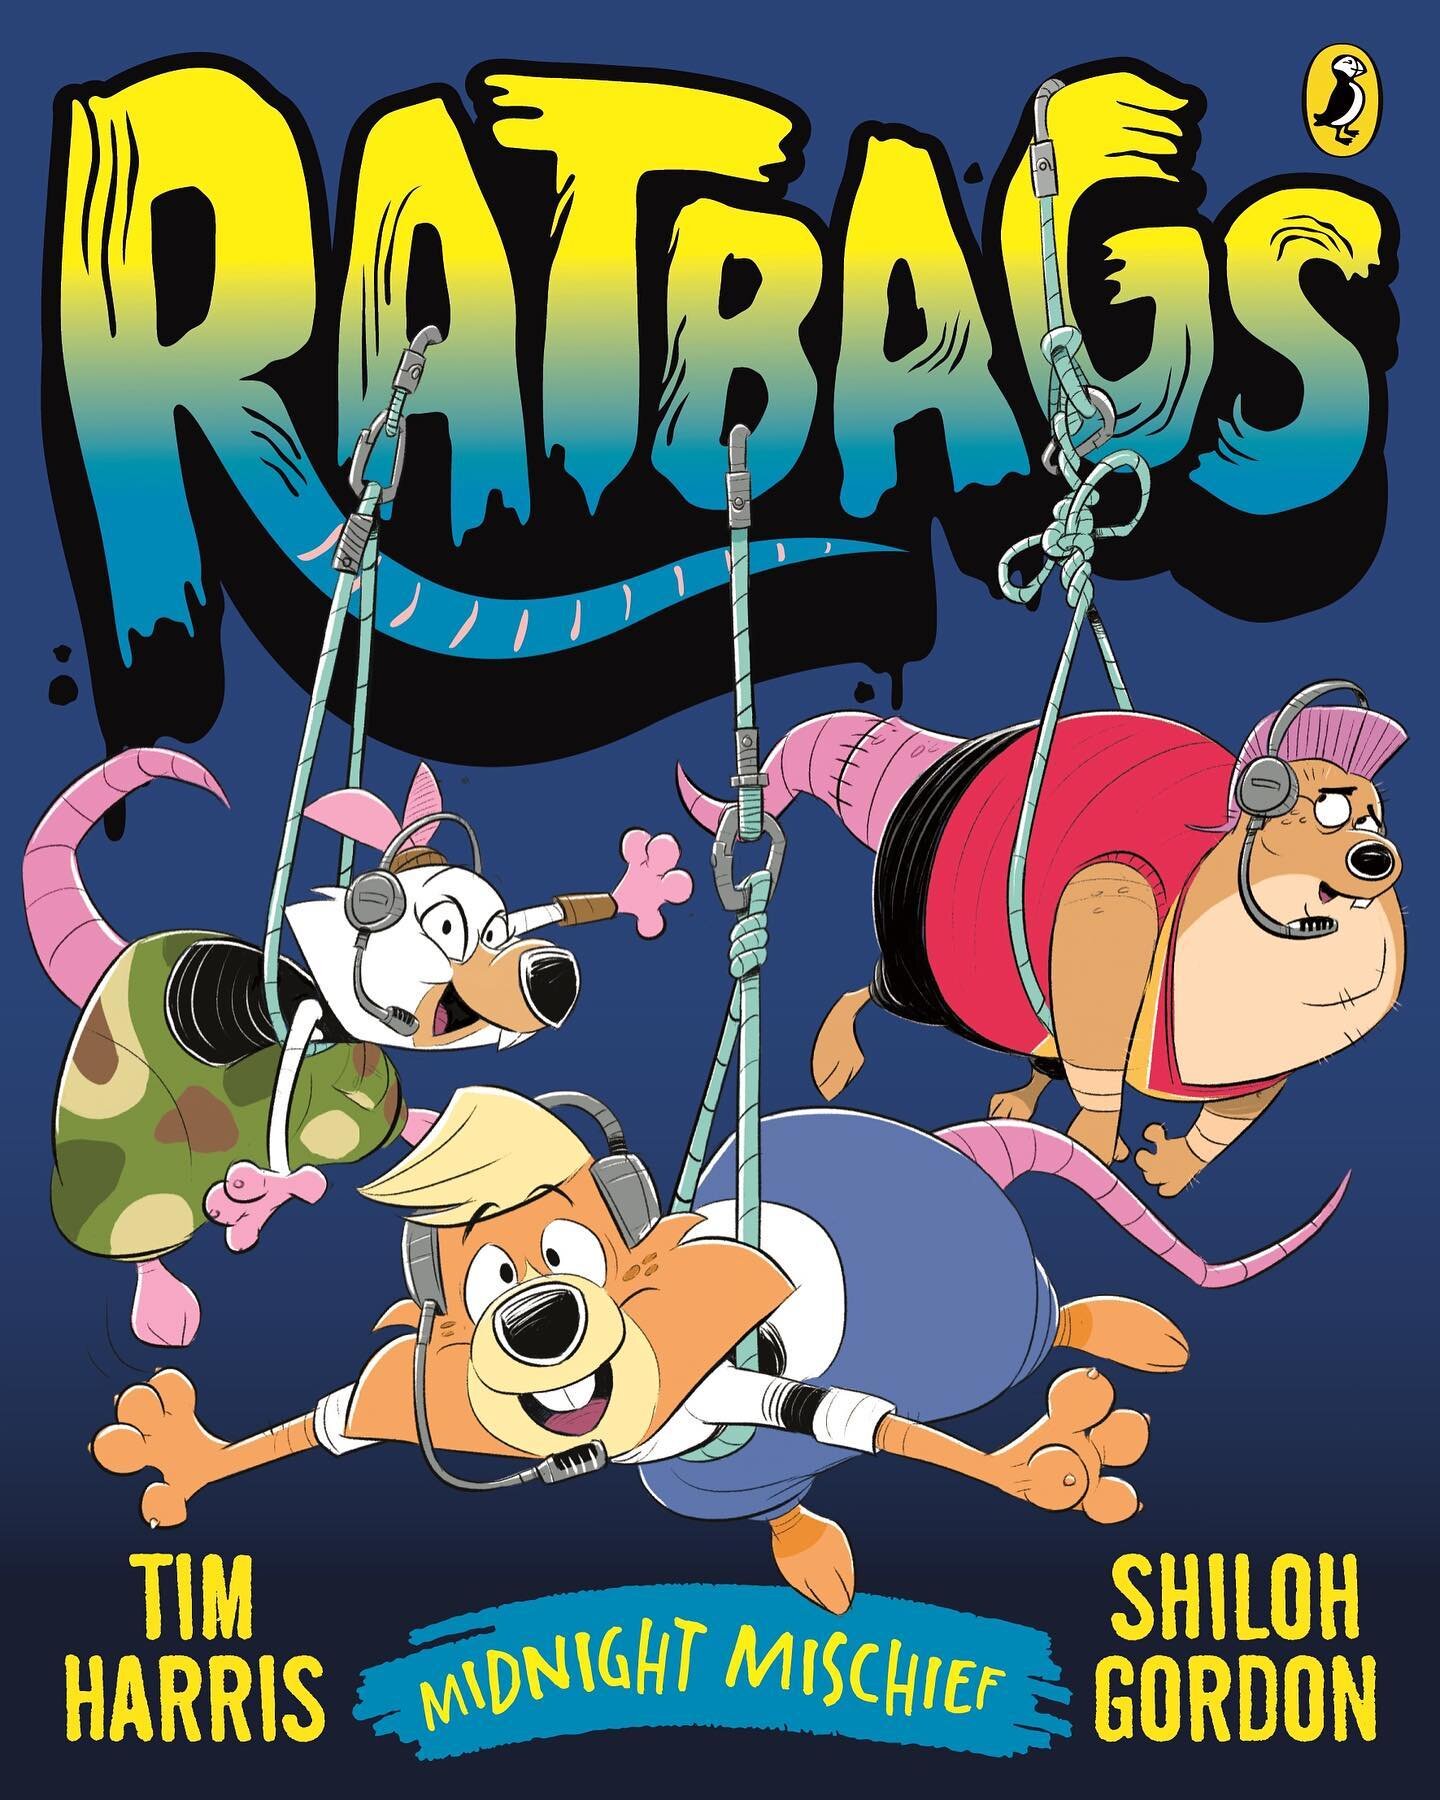 &lsquo;Official&rsquo; social media cover reveal for Ratbags Midnight Mischief. 
Released May 2 - two weeks today.
Illustrated by @shilohillustration 
Designed by @roman_italic 
Published by @puffinbooksaus 
Thank you to everyone who has sent photos 